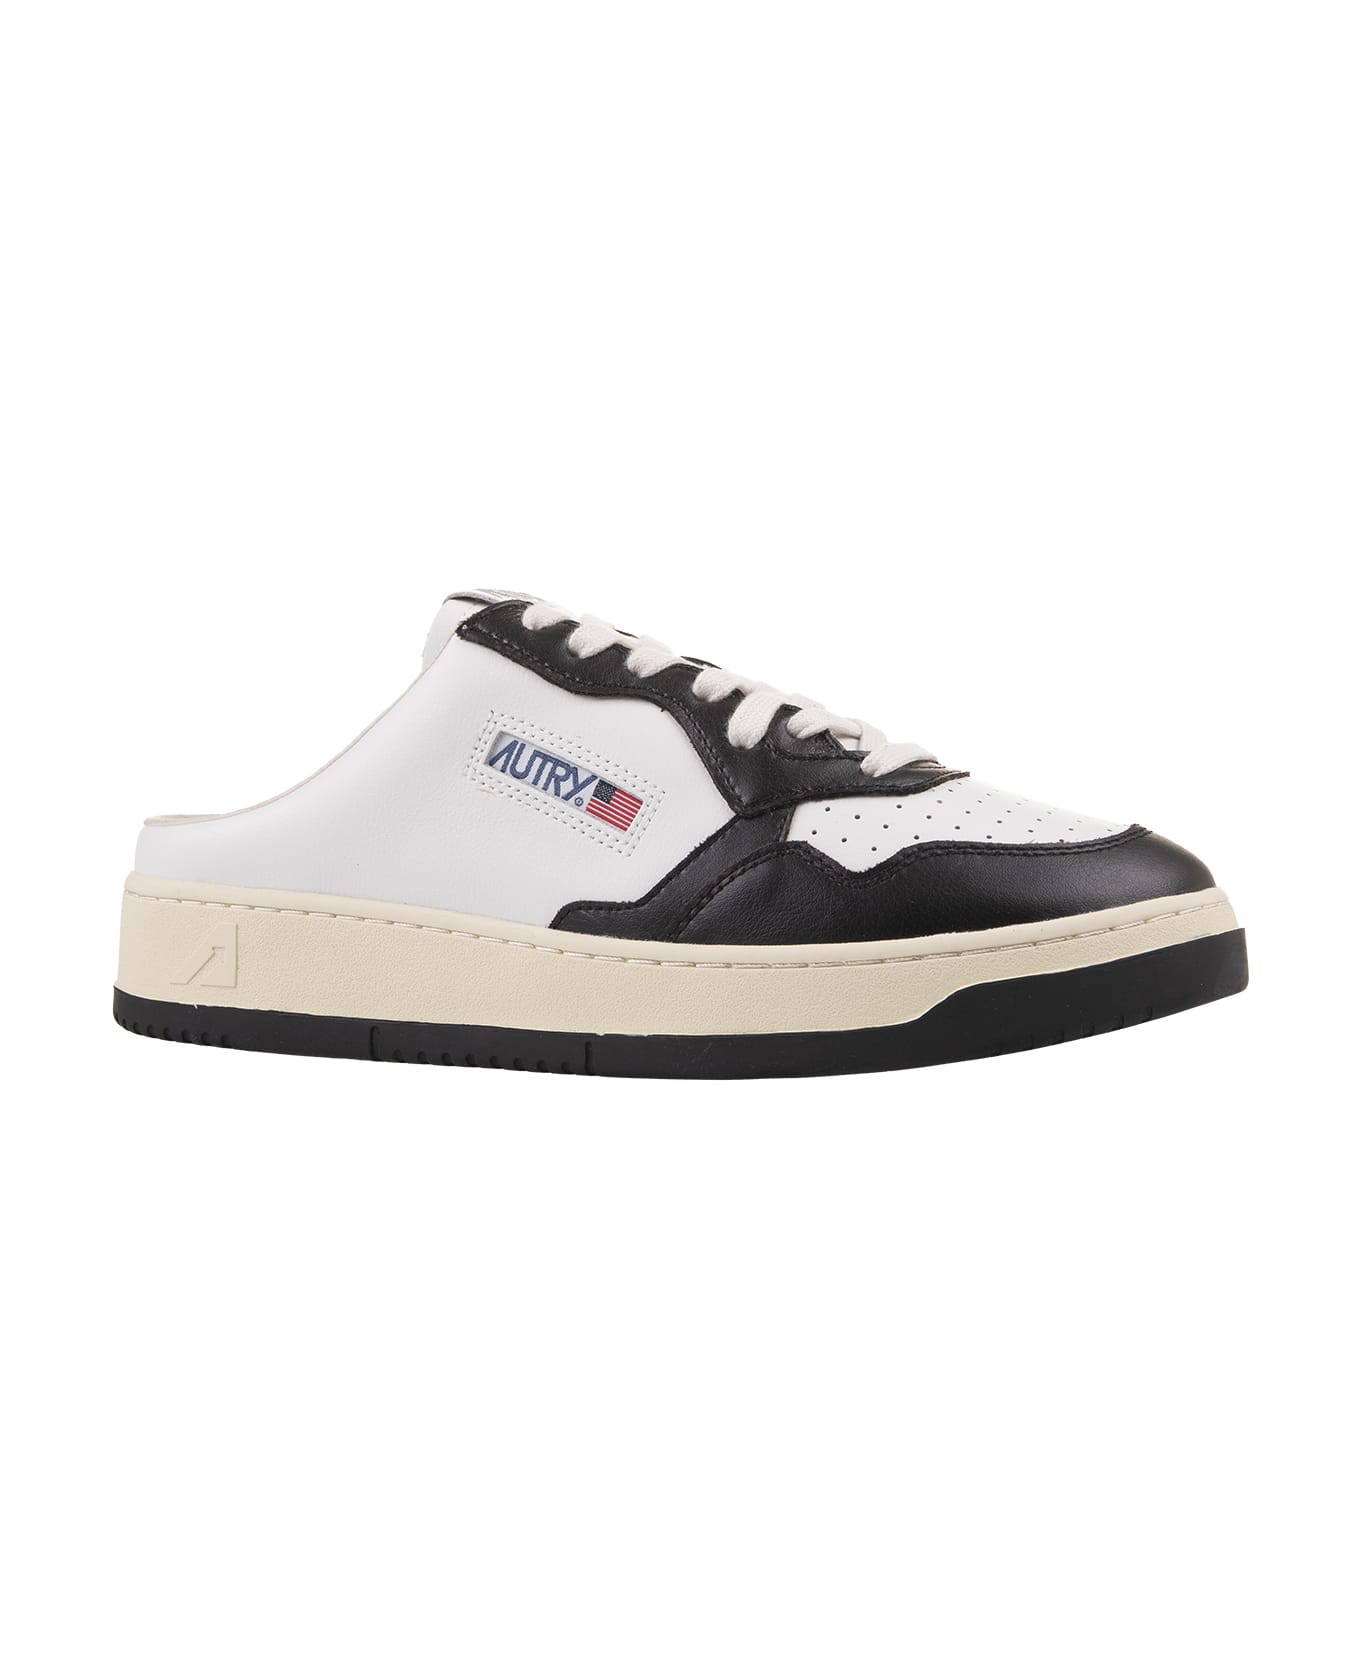 Autry White And Black Medalist Mule Sneakers - Black スニーカー